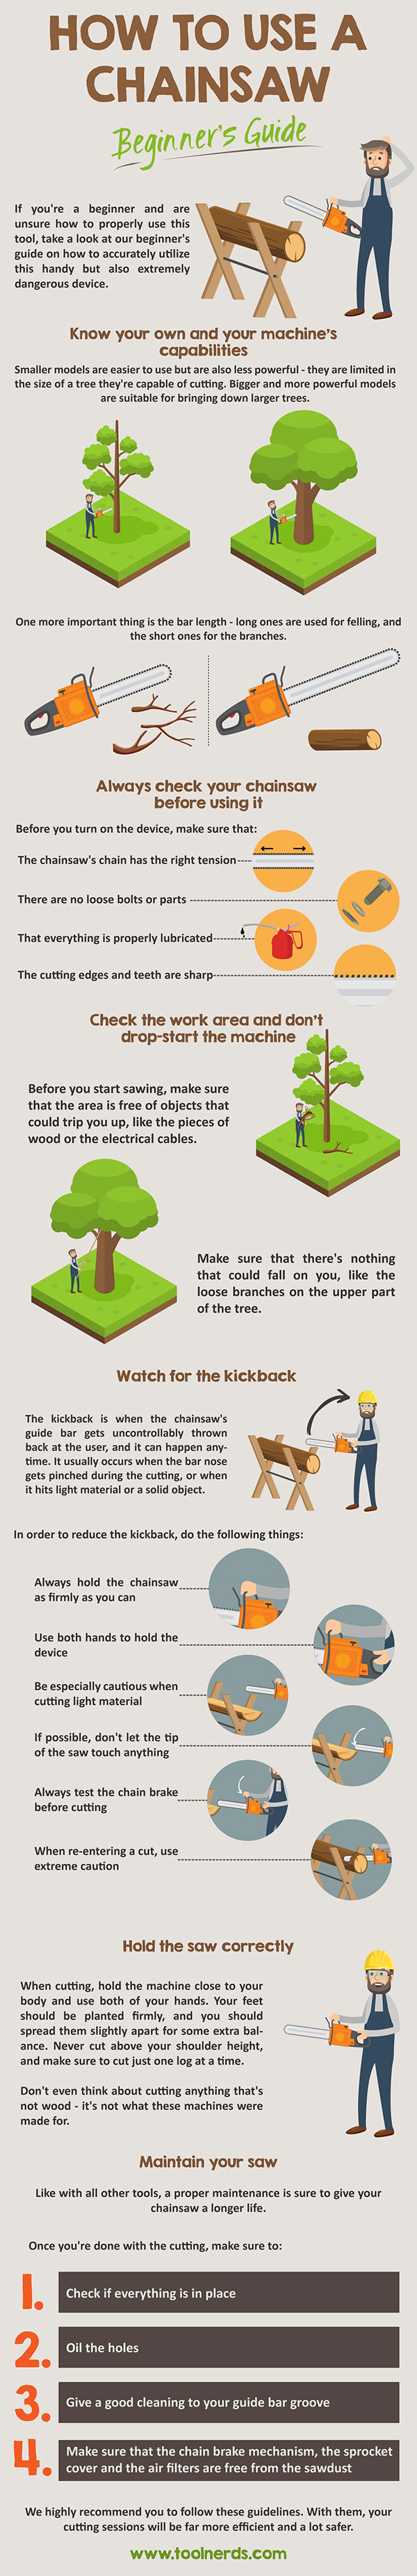 How to Use a Chainsaw - Beginner